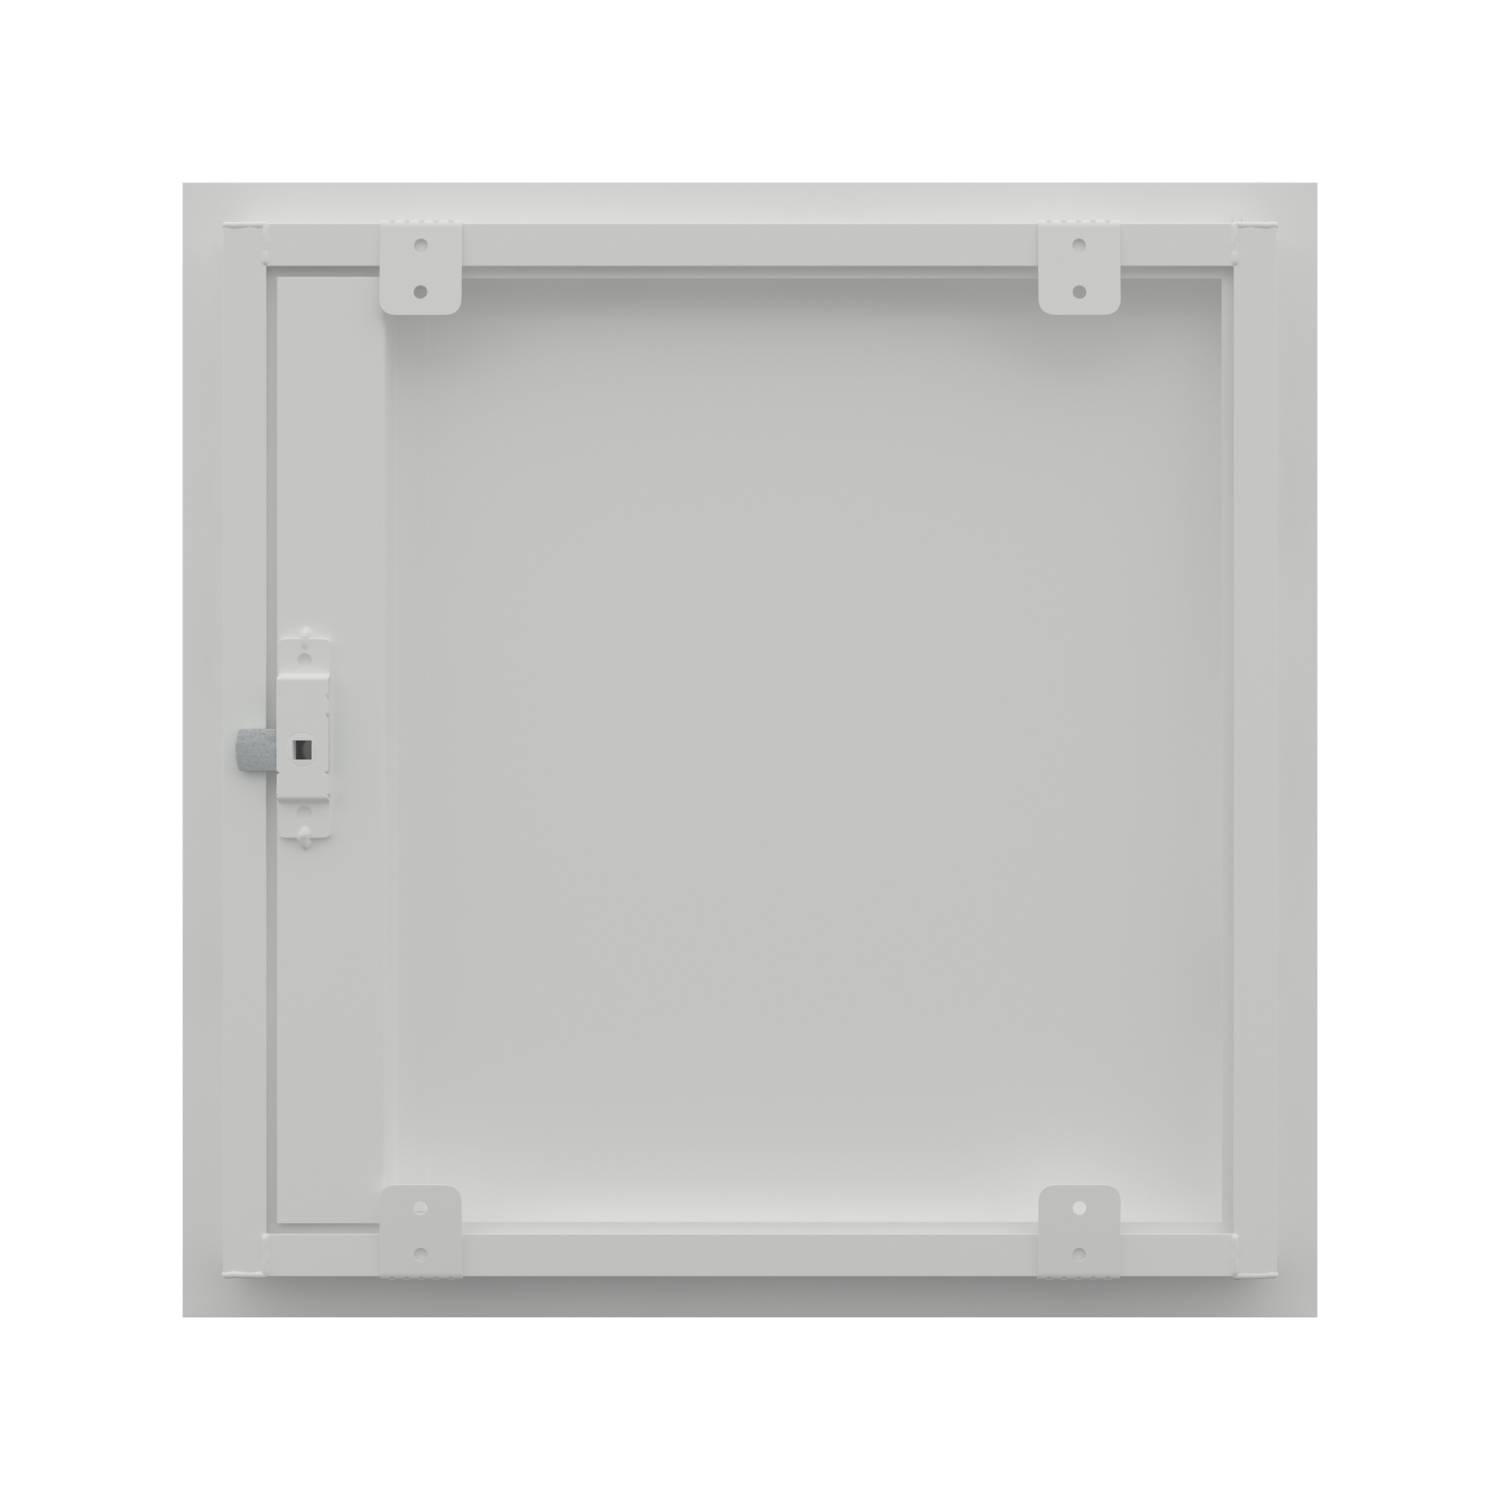 Slimfit Wall Metal Access Panel (EX01 Range) - Picture Frame - Non Fire Rated - Access Panel